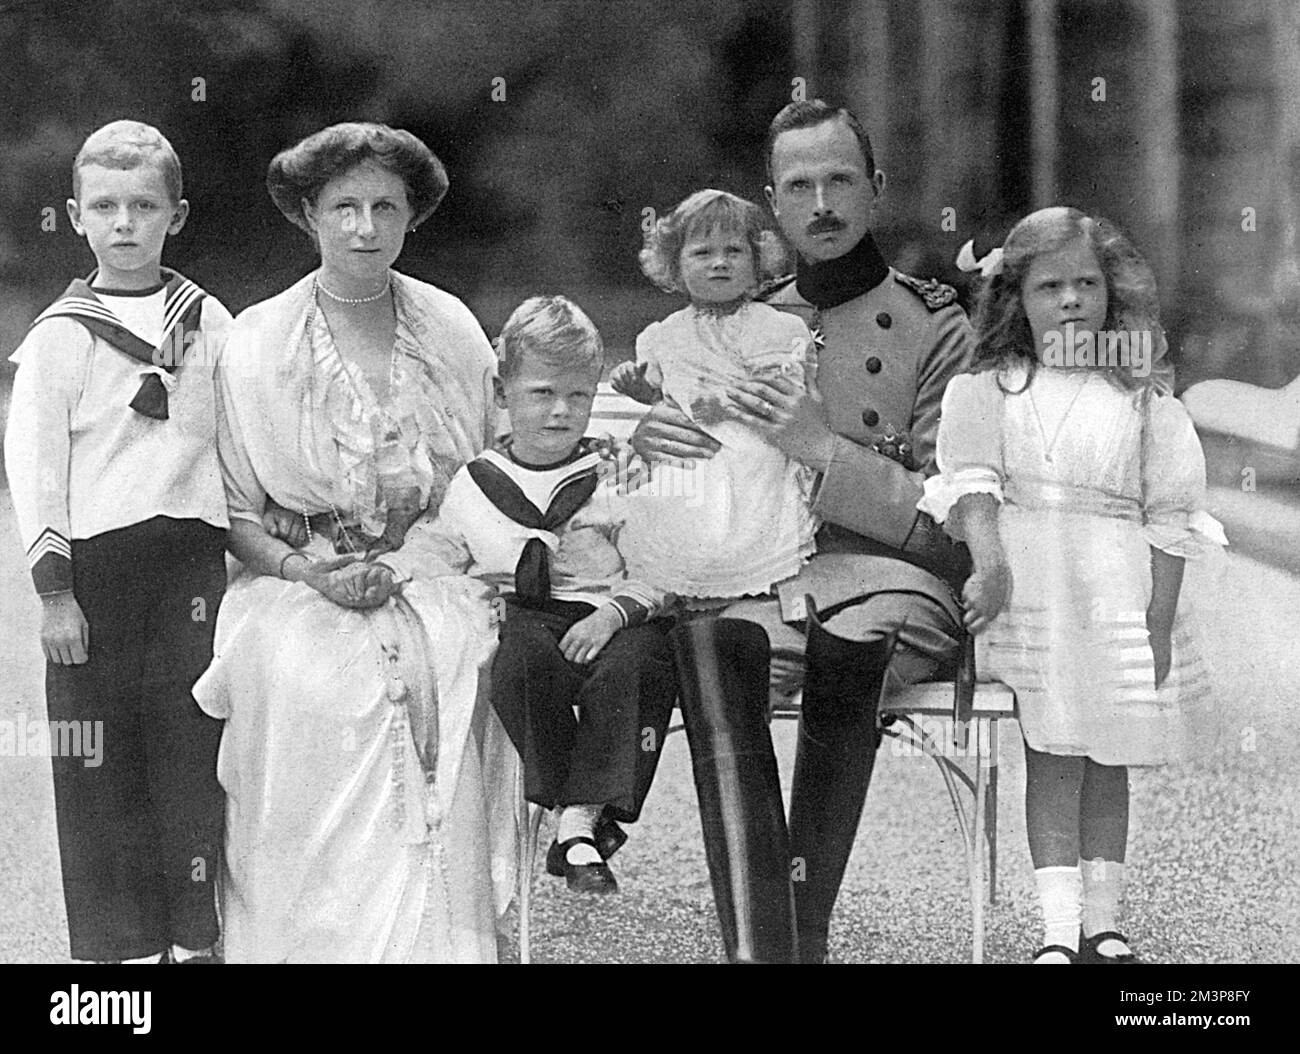 Duke Charles Edward of Saxe-Coburg-Gotha, with the Duchess (Victoria Adelaide) and their family, from left: Prince John Leopold; Prince Hubert; Princess Caroline; Princess Sybil. The grandson of Queen Victoria, and son of the Duke of Albany, Charles Edward faced a conflict of national loyalty as war broke out months after this photograph was taken. Holding a commission in the German army, he chose to support Germany rather than the country of his birth. Stock Photo